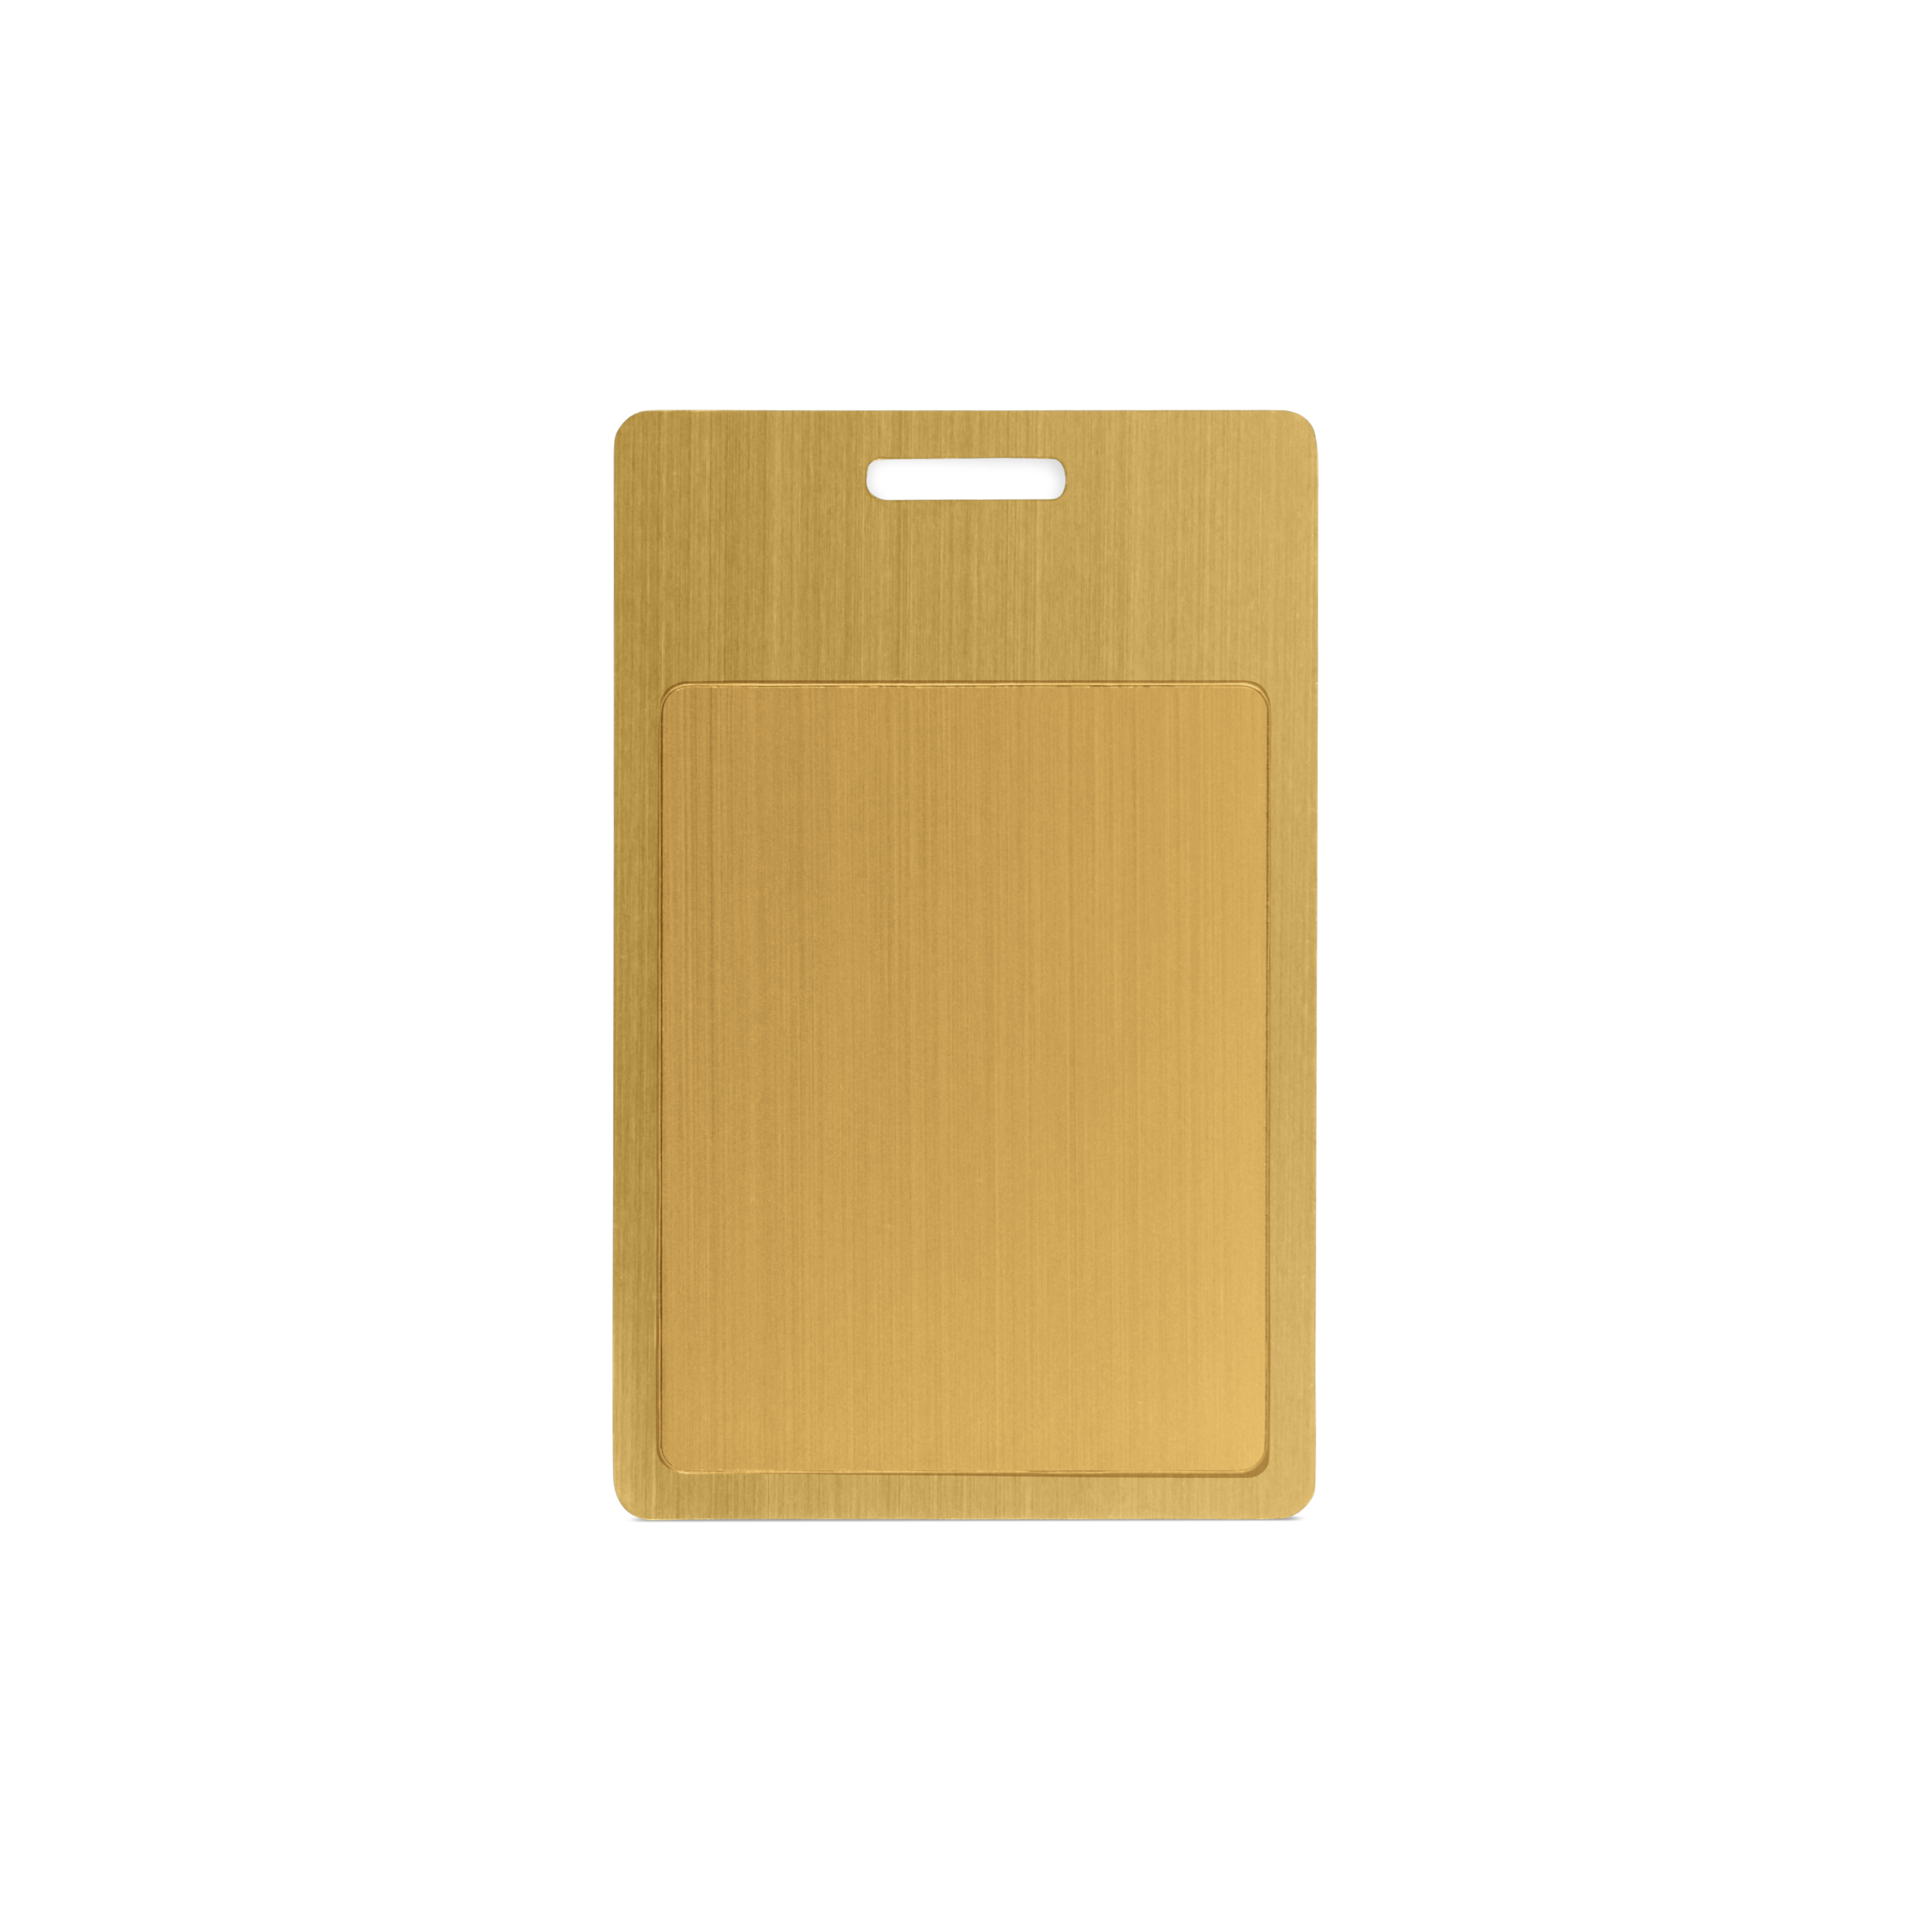 NFC card metal - 85,6 x 54 mm - NTAG213 - 180 bytes - gold - portrait format with slot